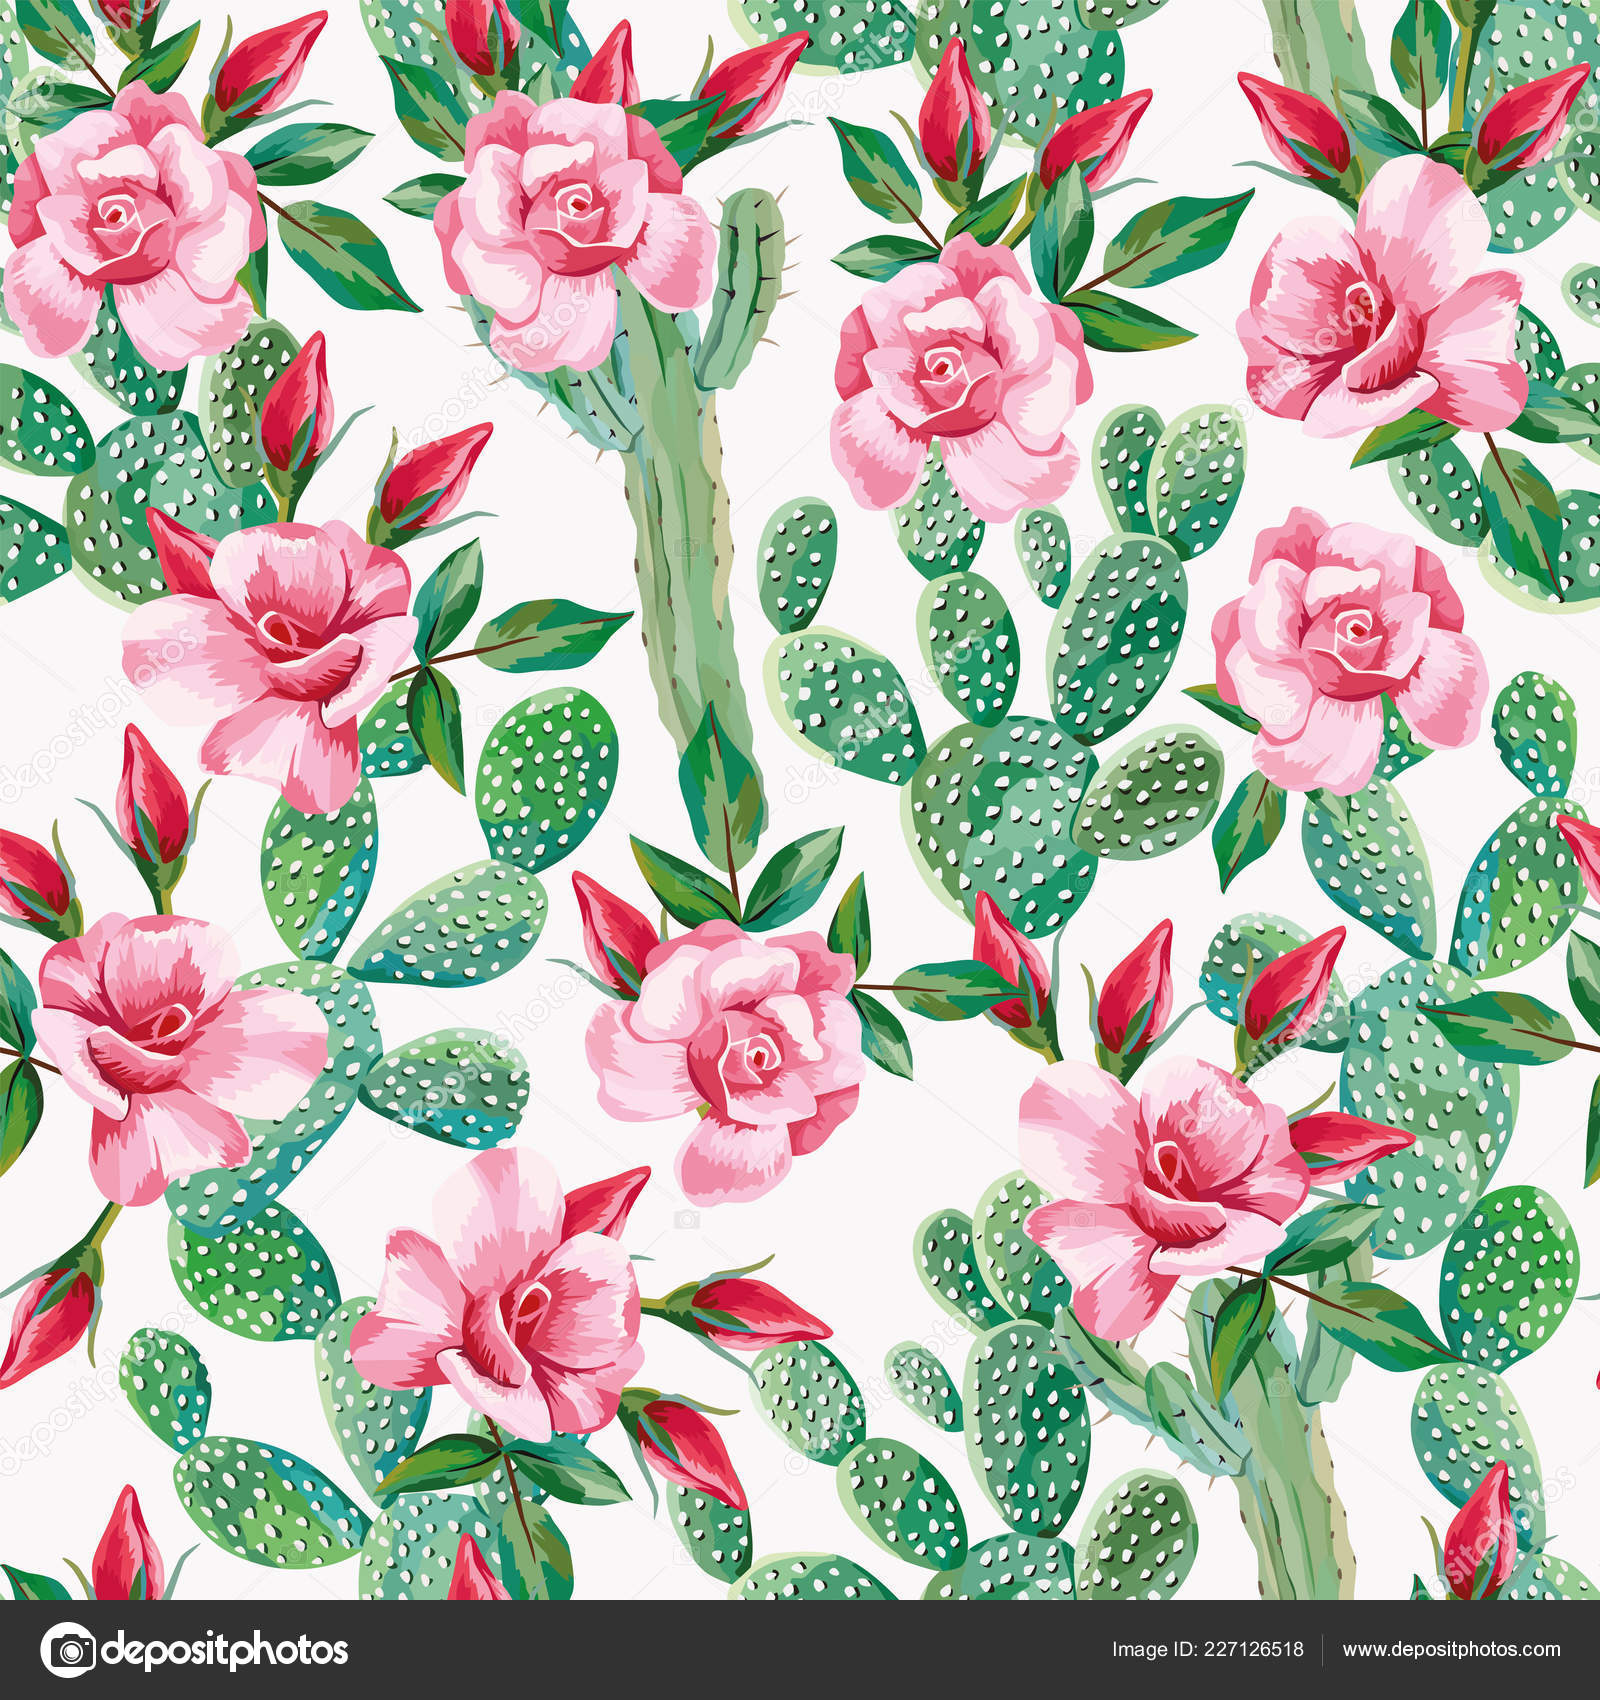 Cactus And Floral Background - HD Wallpaper 